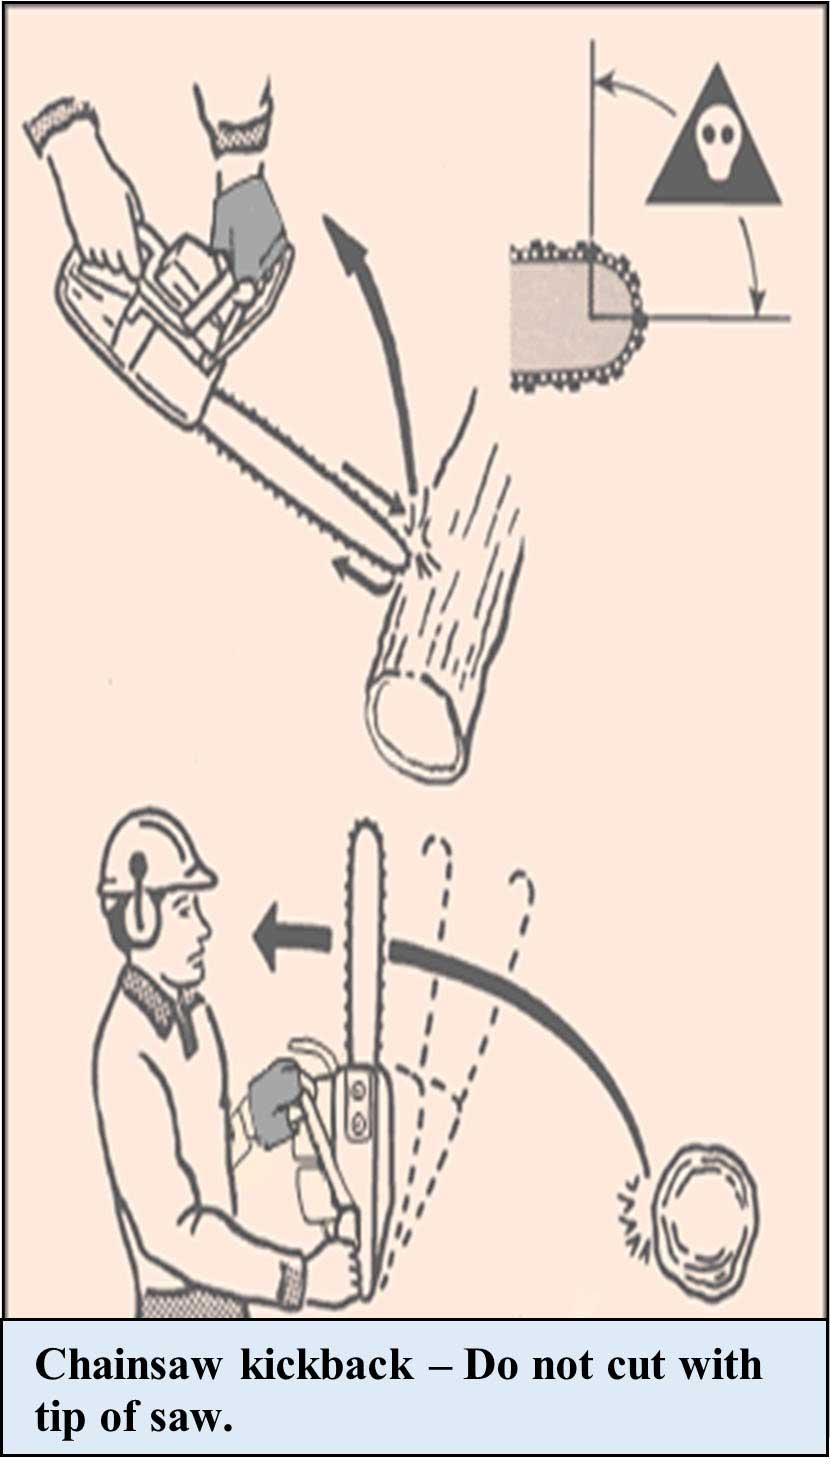 Image showing a Chainsaw Kickback - Do not cut with tip of saw.